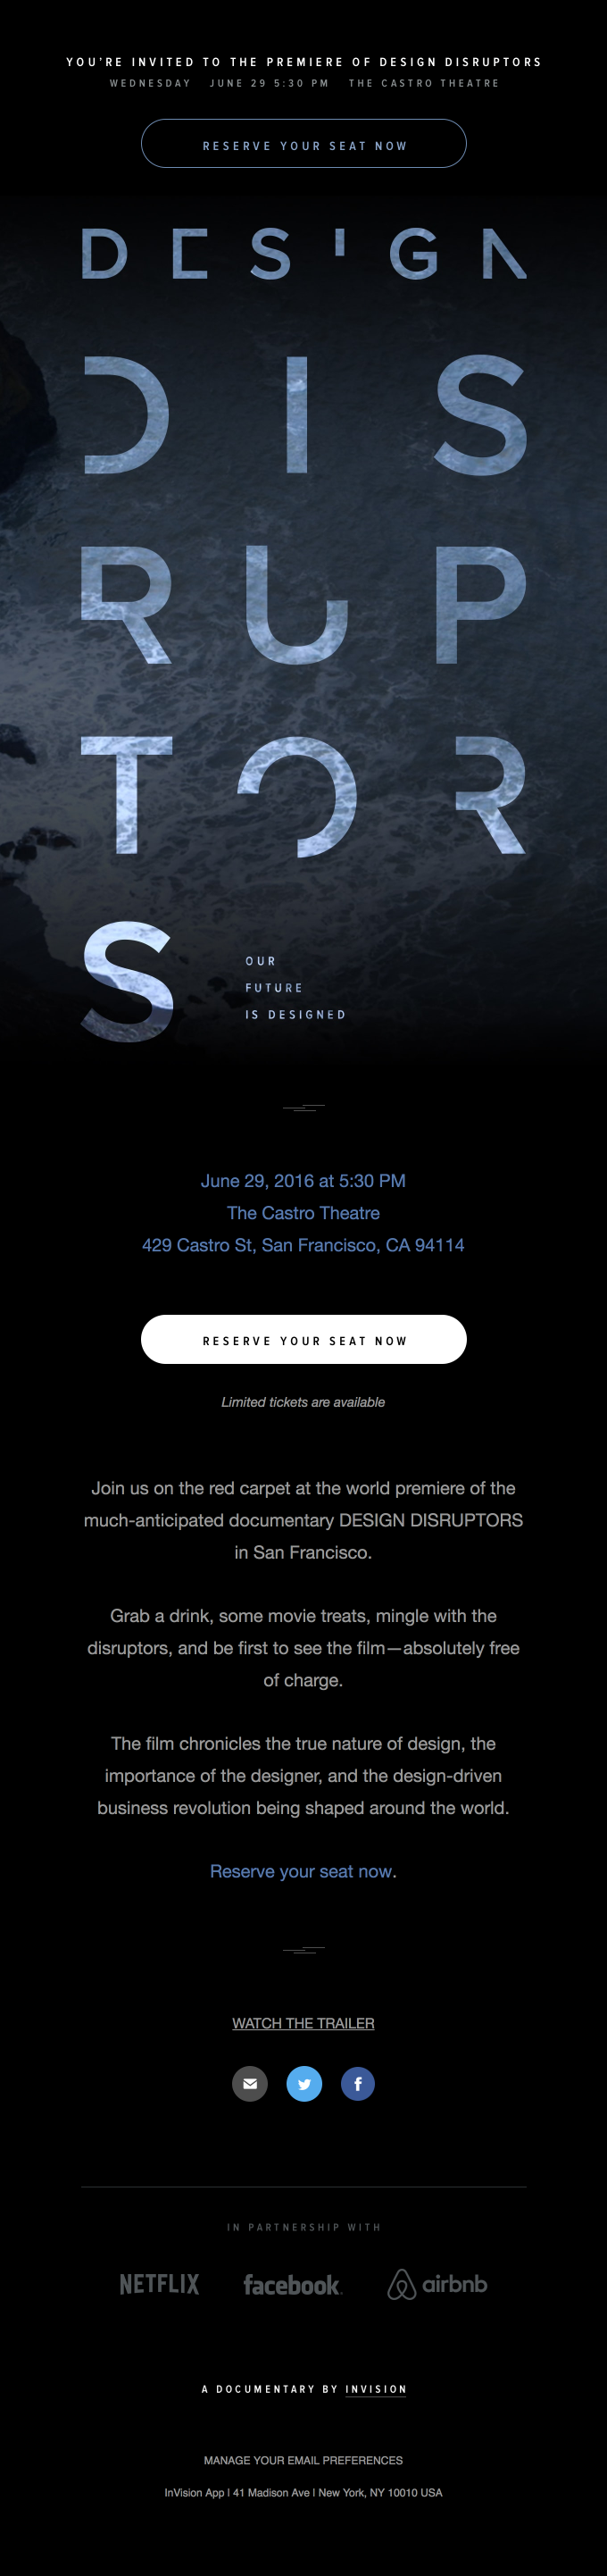 You’re invited to the world premiere of DESIGN DISRUPTORS